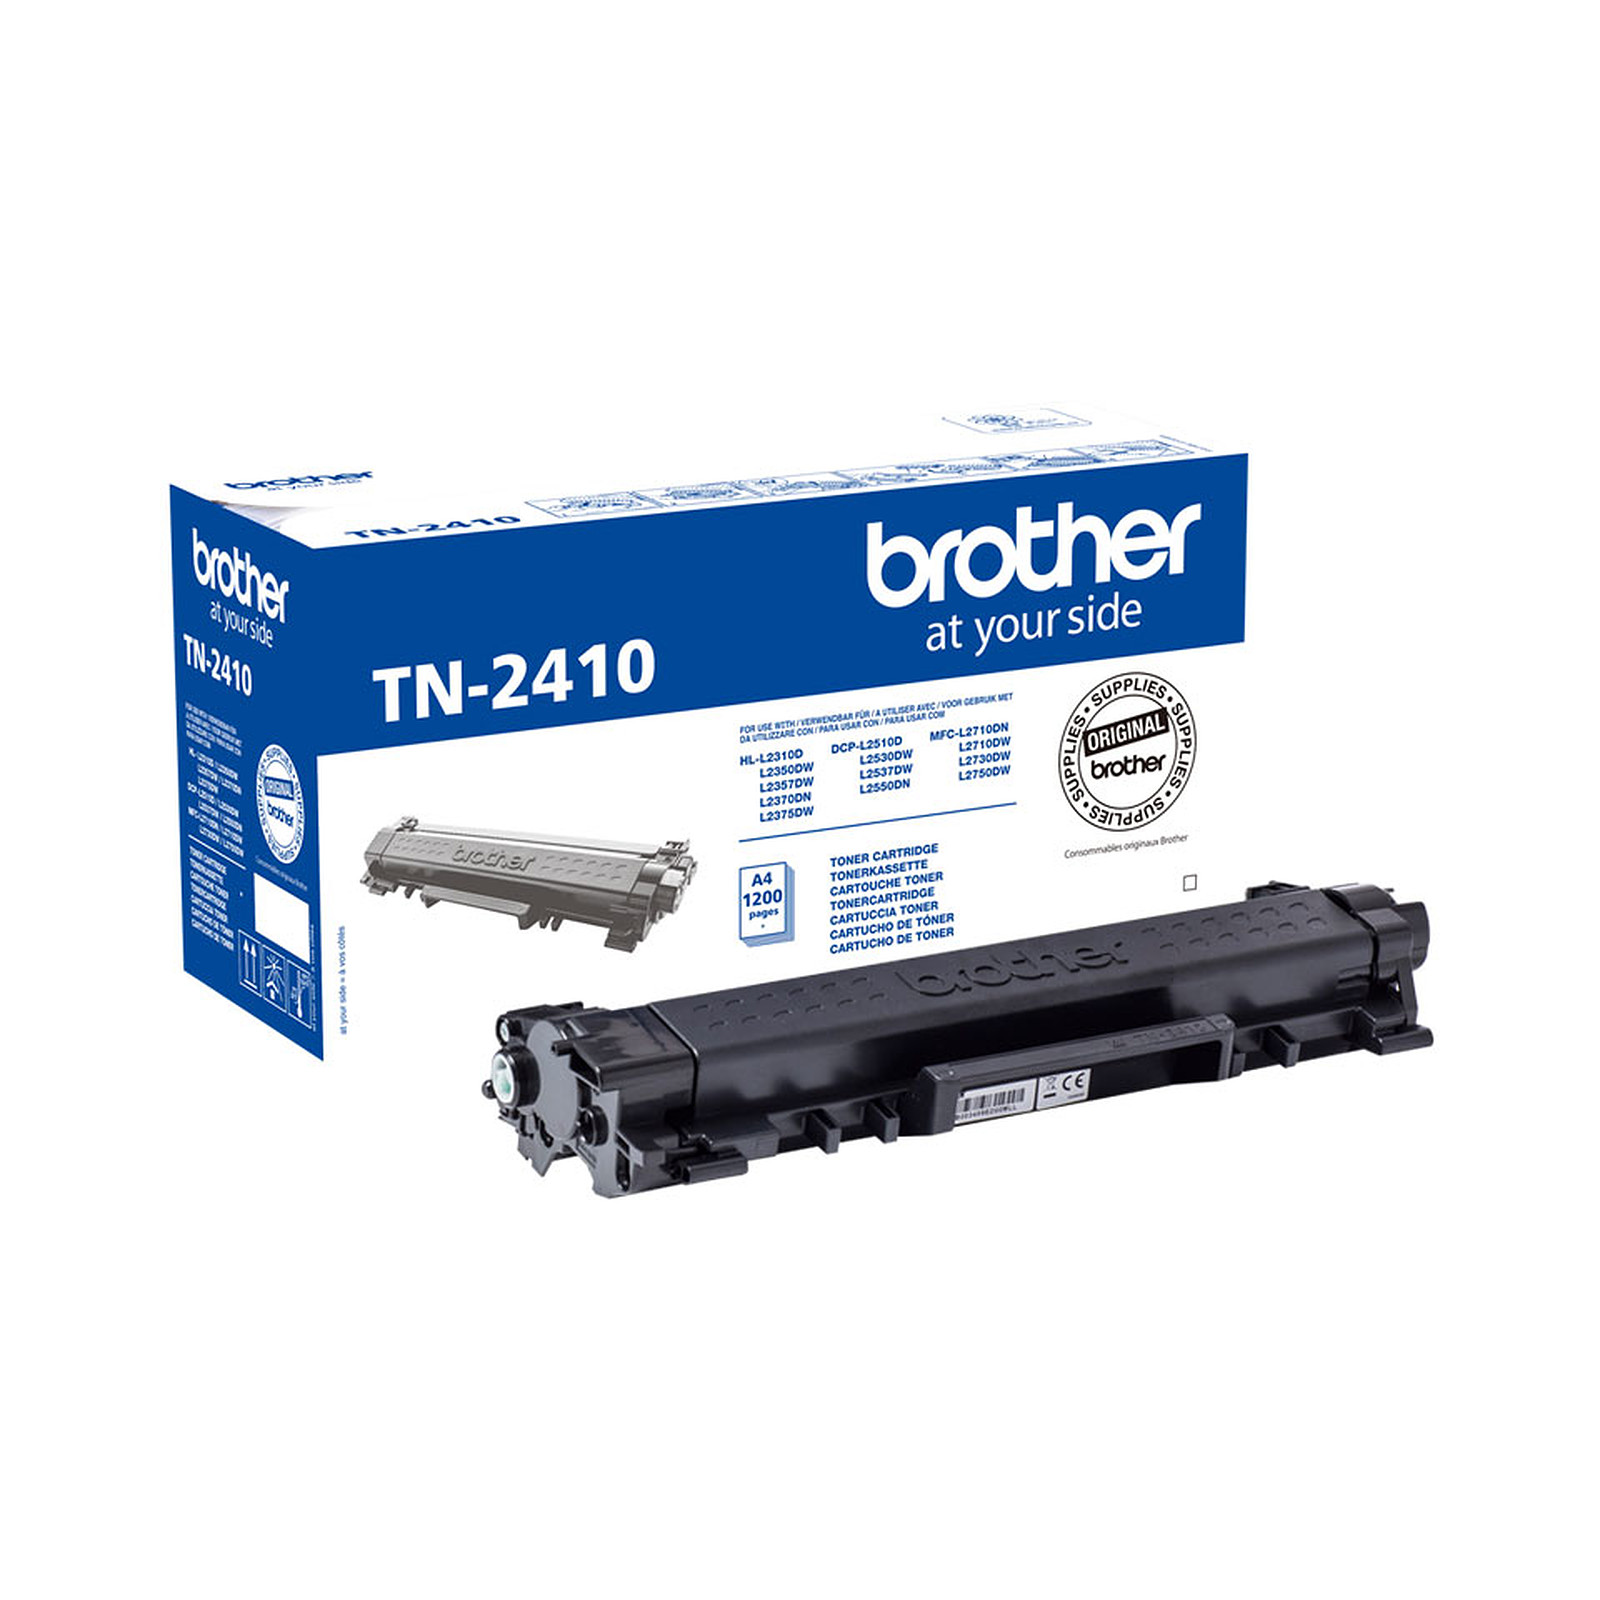 Brother TN-2410 (Noir) - Toner imprimante Brother - Occasion